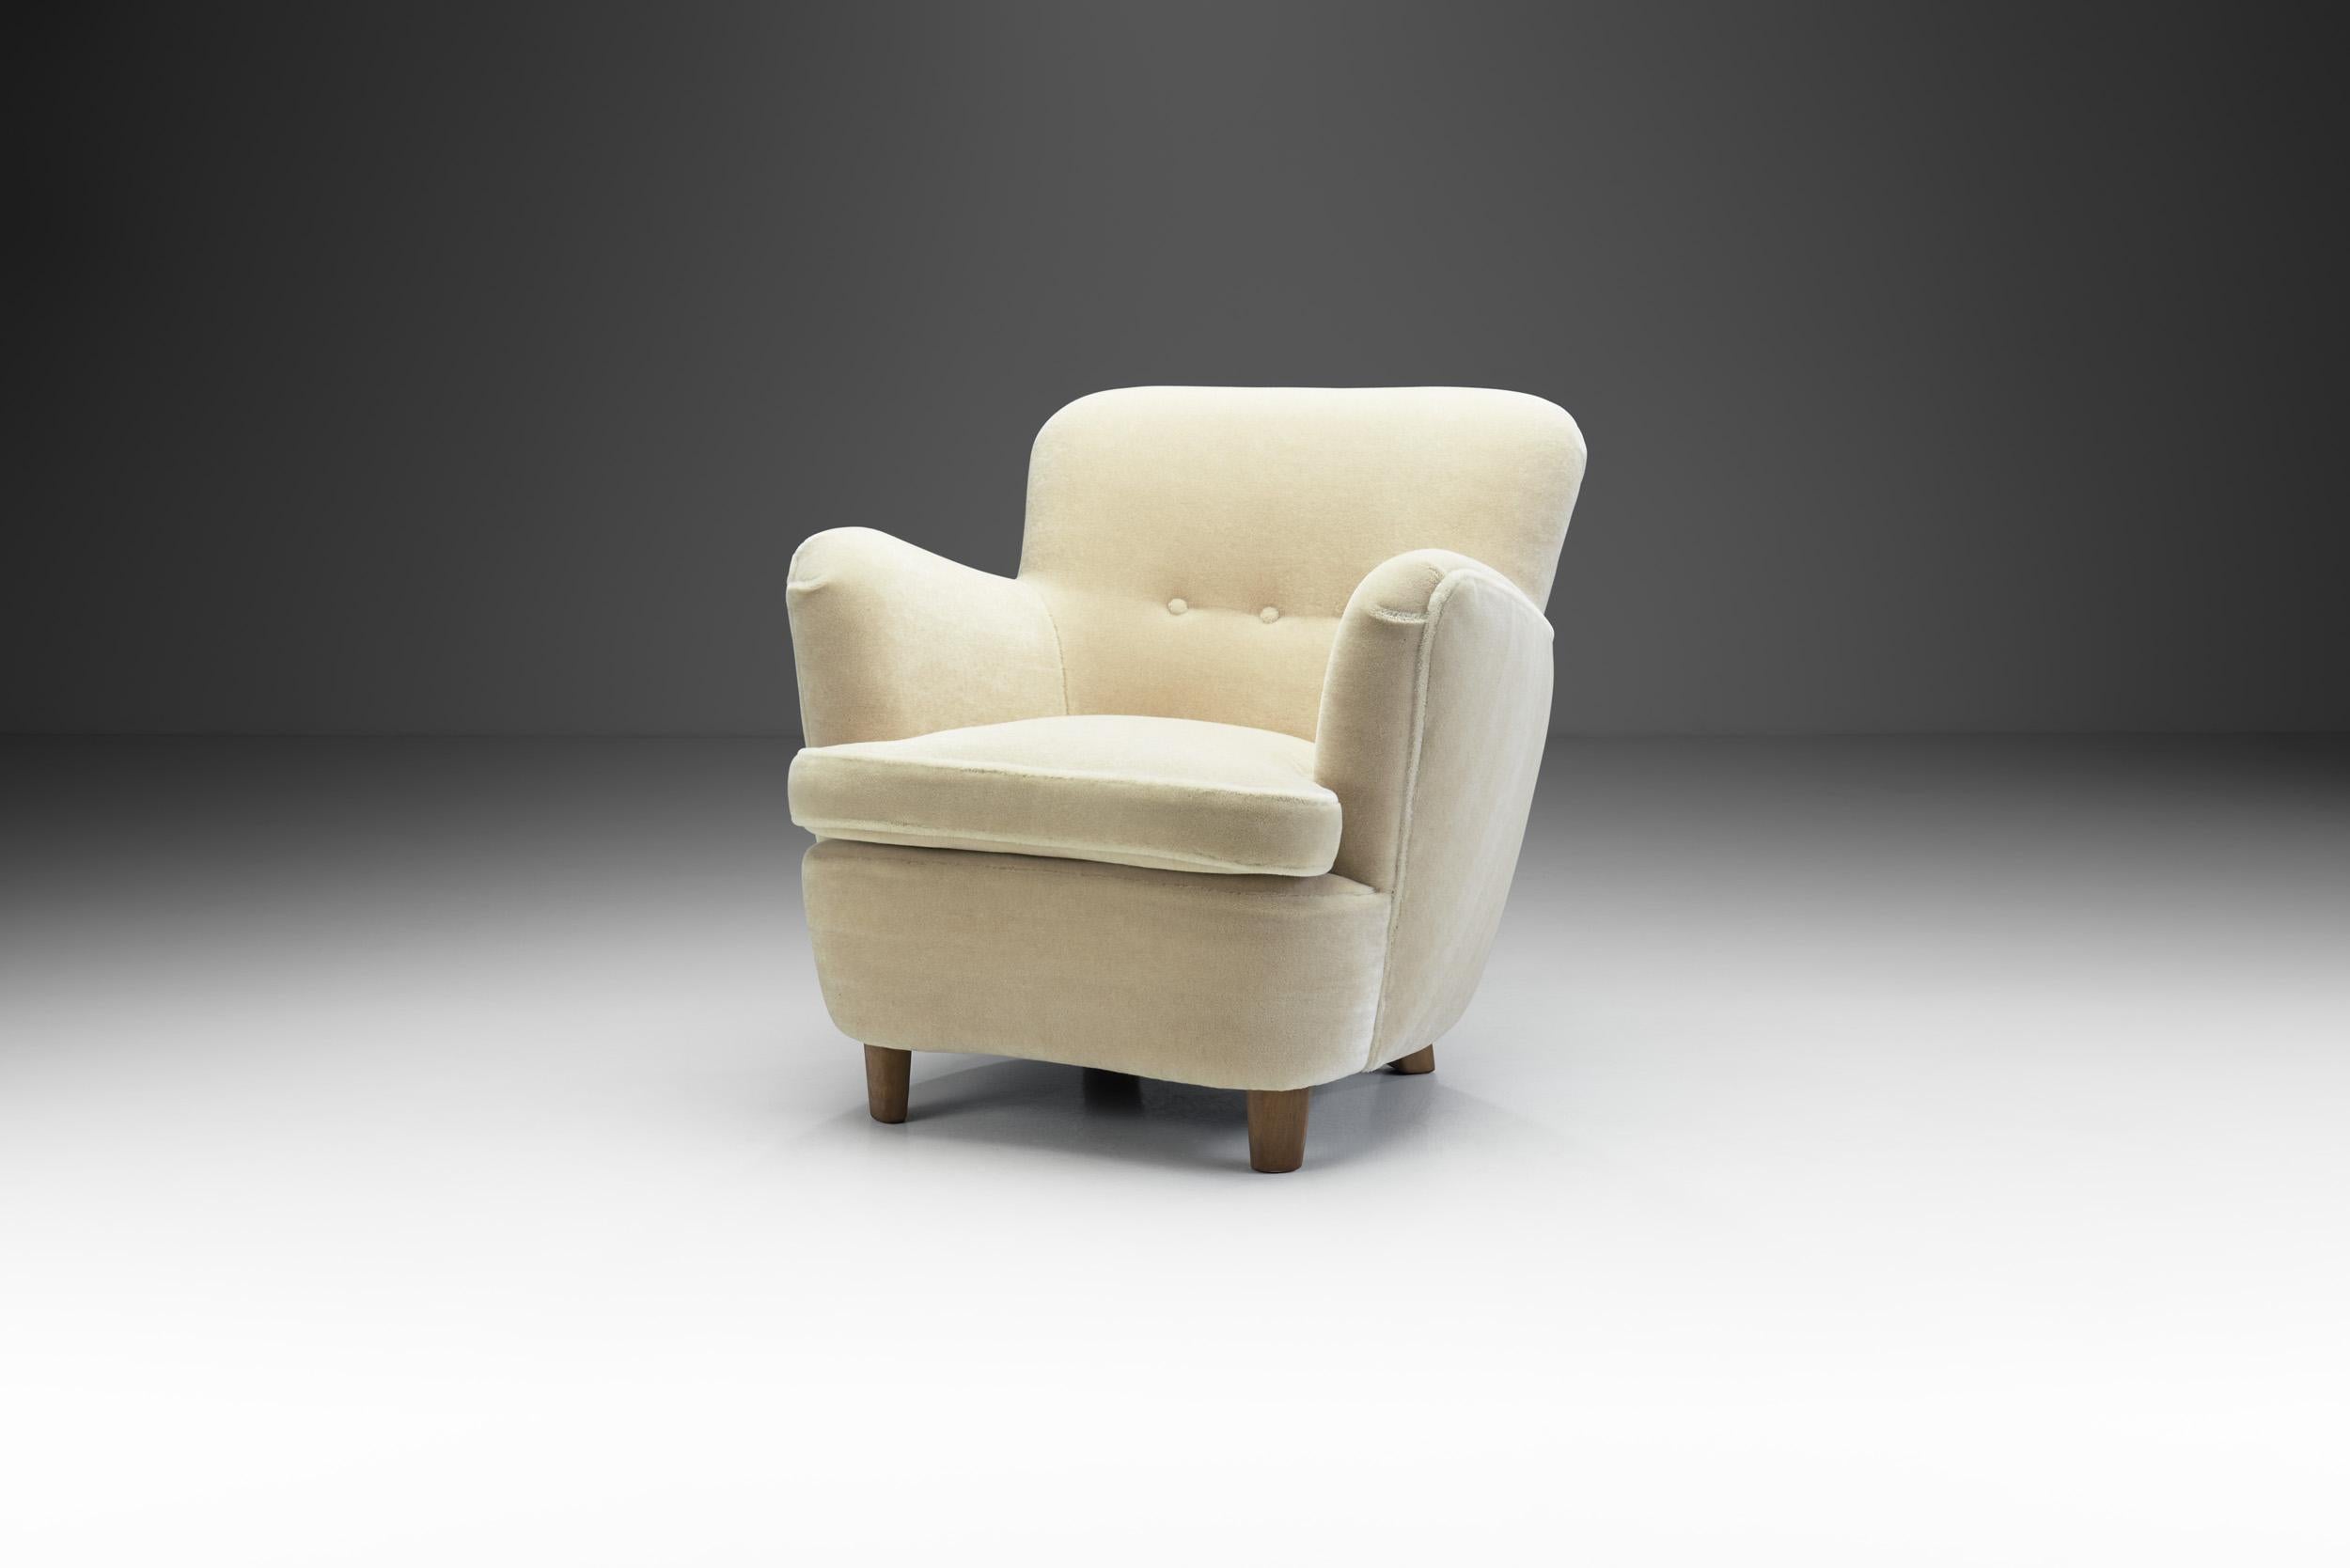 This armchair is an elegant and comfortable evidence of the mastery and artistry of the Swedish cabinetmakers who defined mid-20th century modern seating. This model is of the highest quality, both in terms of materials and craftsmanship.